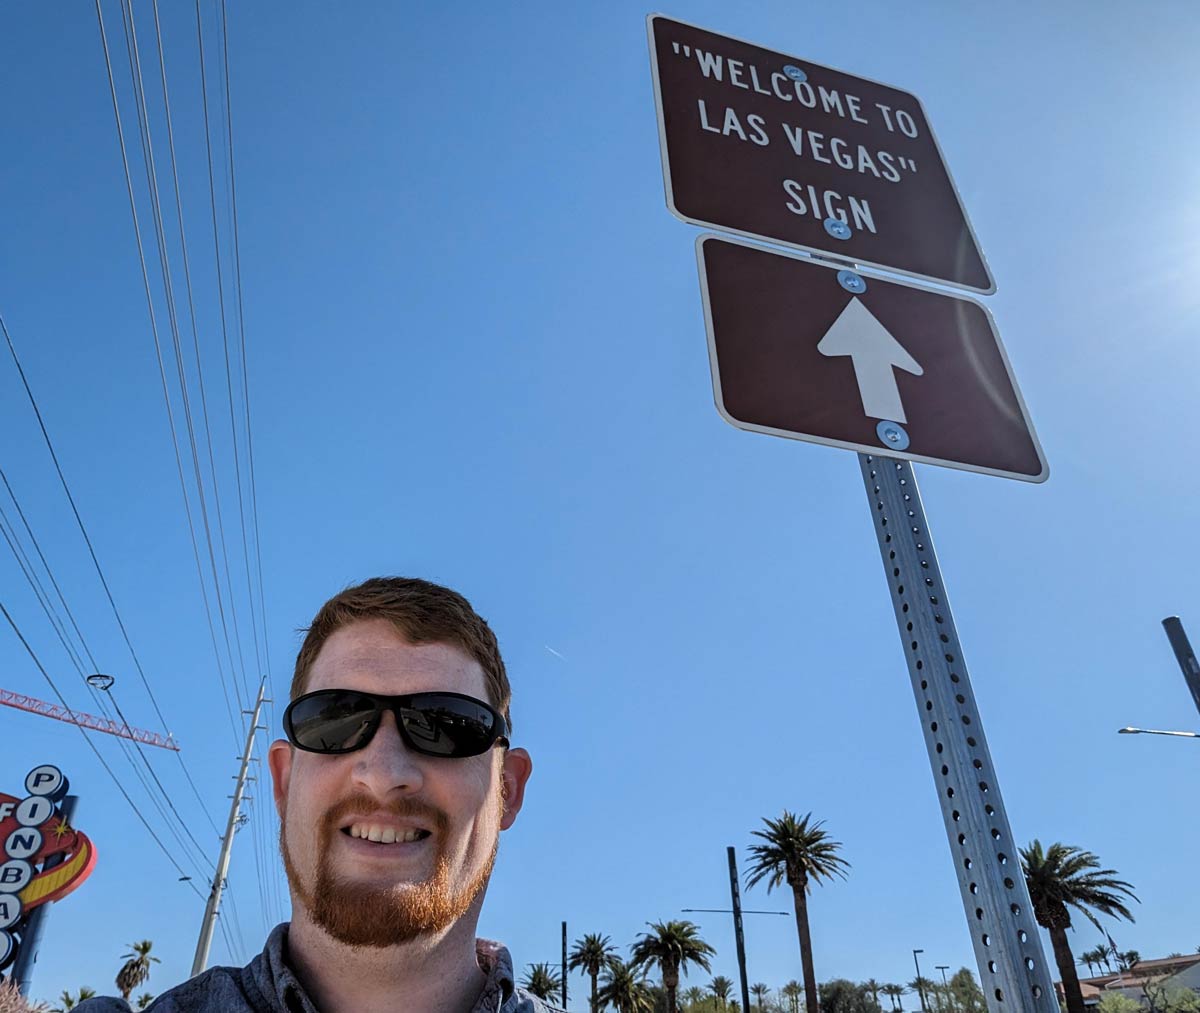 Bit of a walk but I made it to the Welcome To Las Vegas sign!